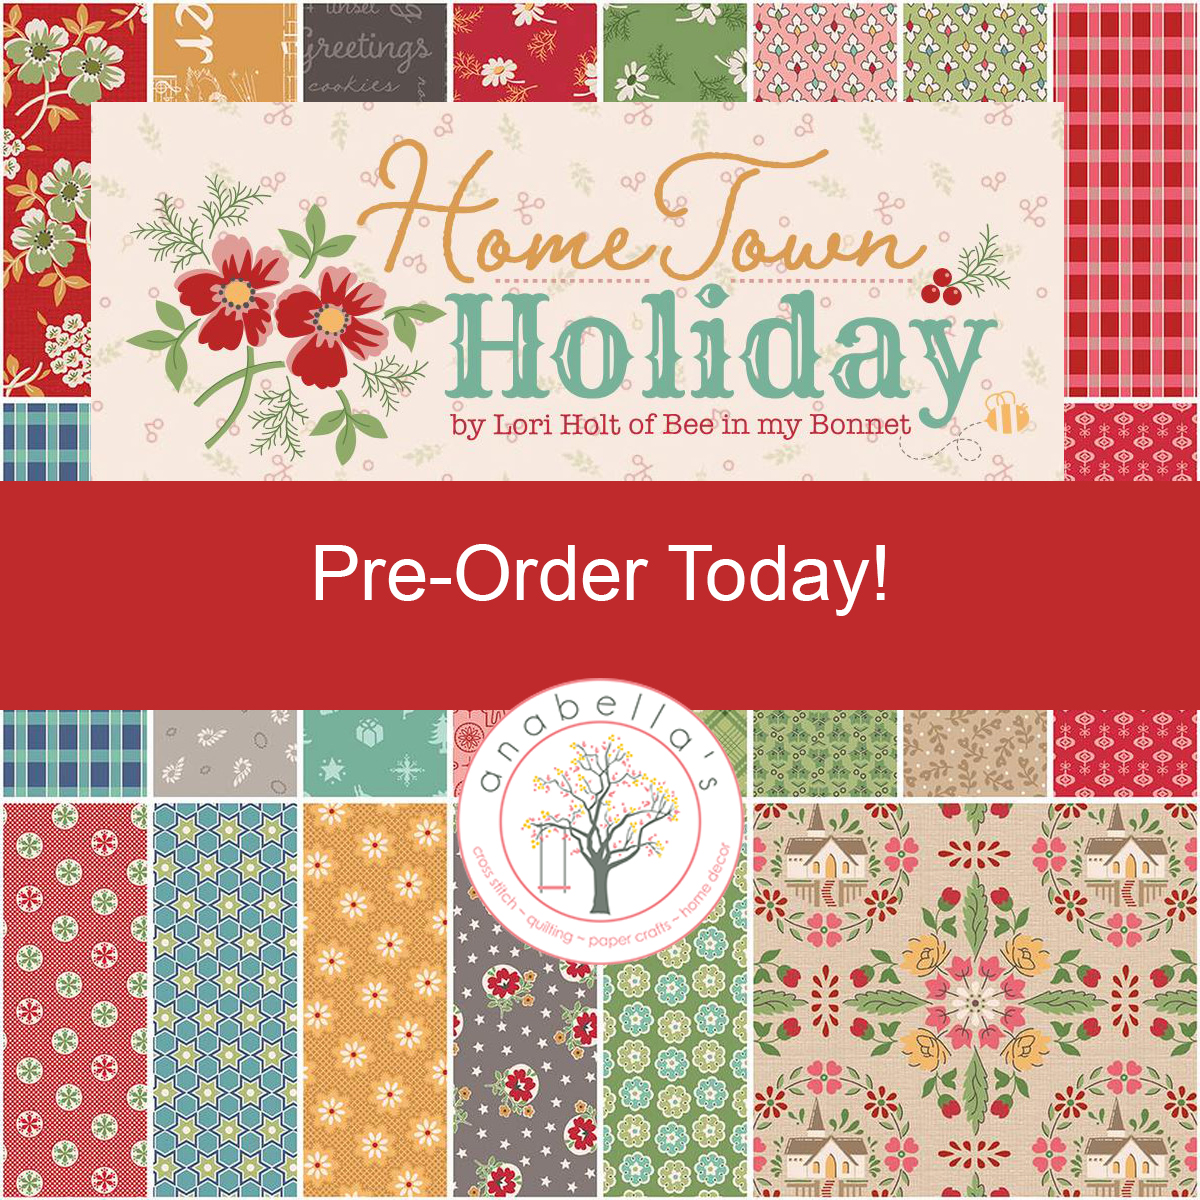 Lori Holt Home Town Holiday at Anabella's Online Quilt Shop